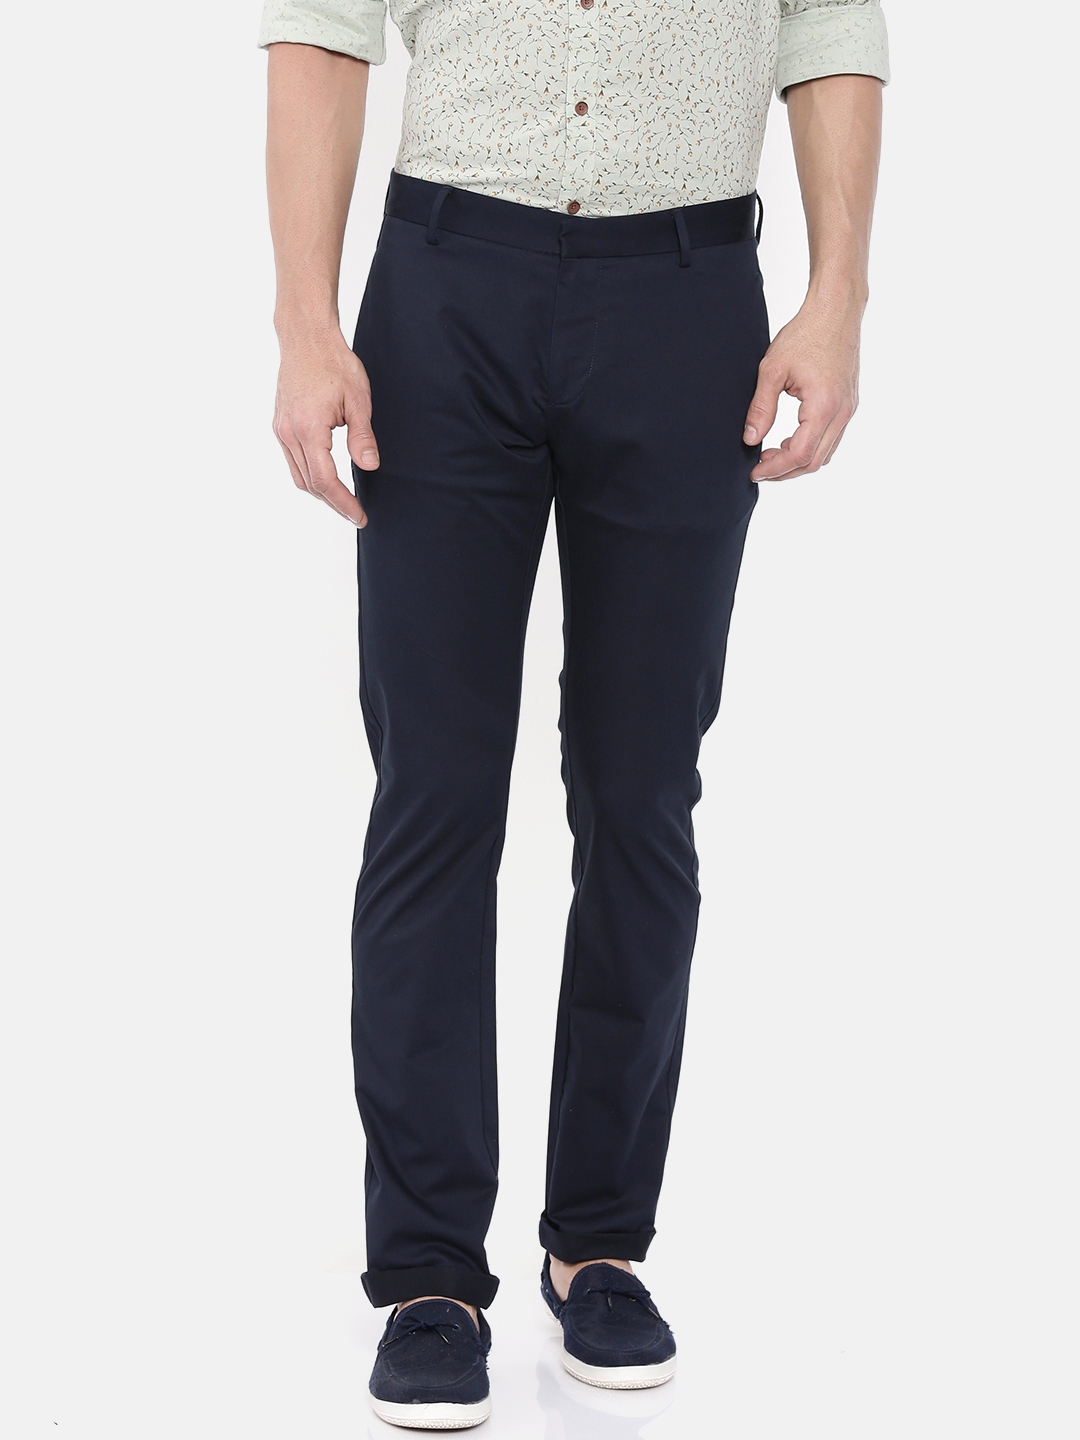 Buy Allen Solly Men Navy Blue Smart Slim Fit Solid Chinos - Trousers ...